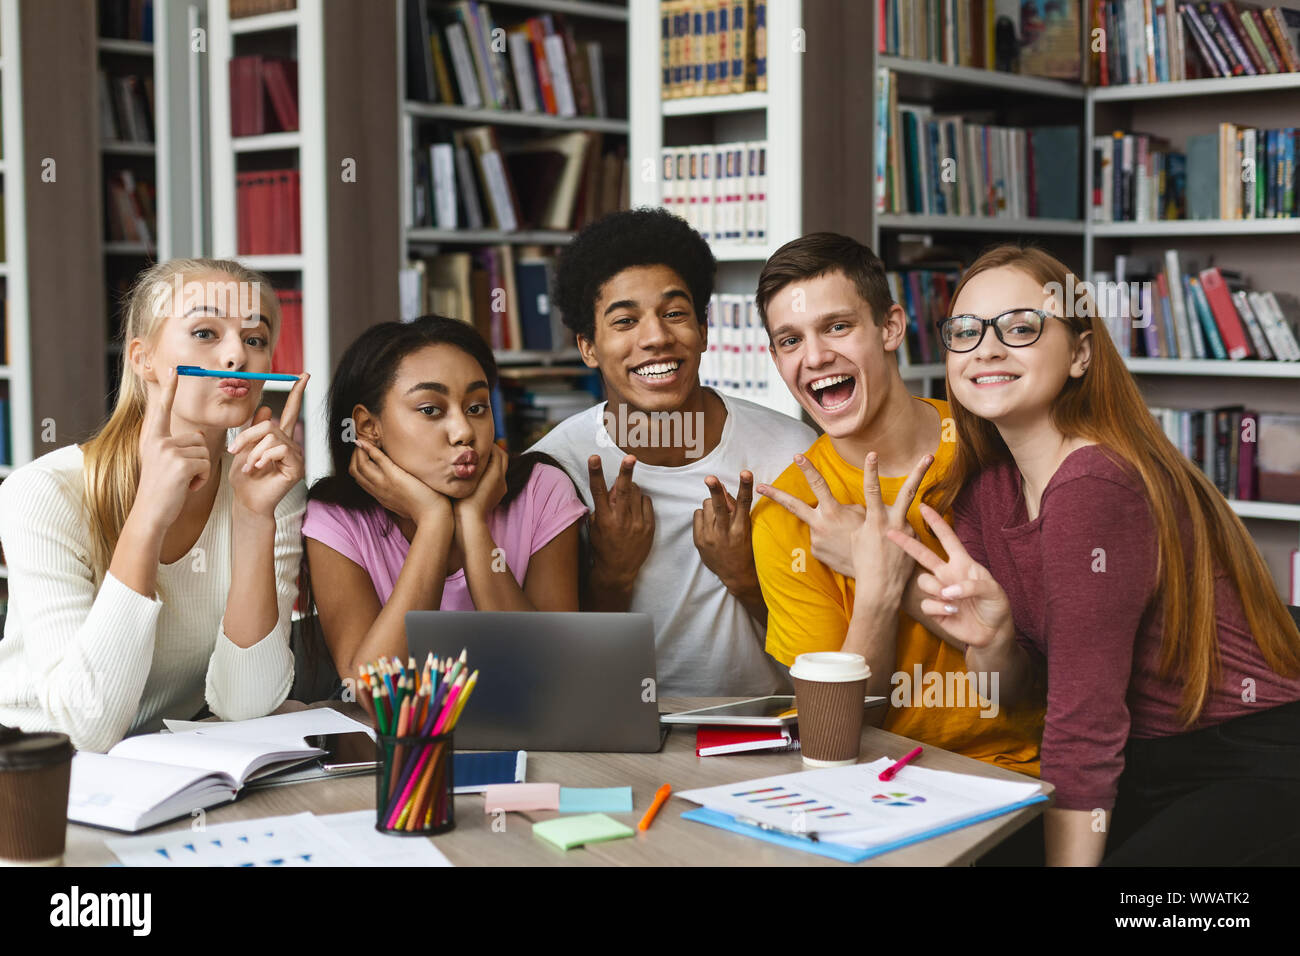 Group of international students having fun while studying Stock Photo